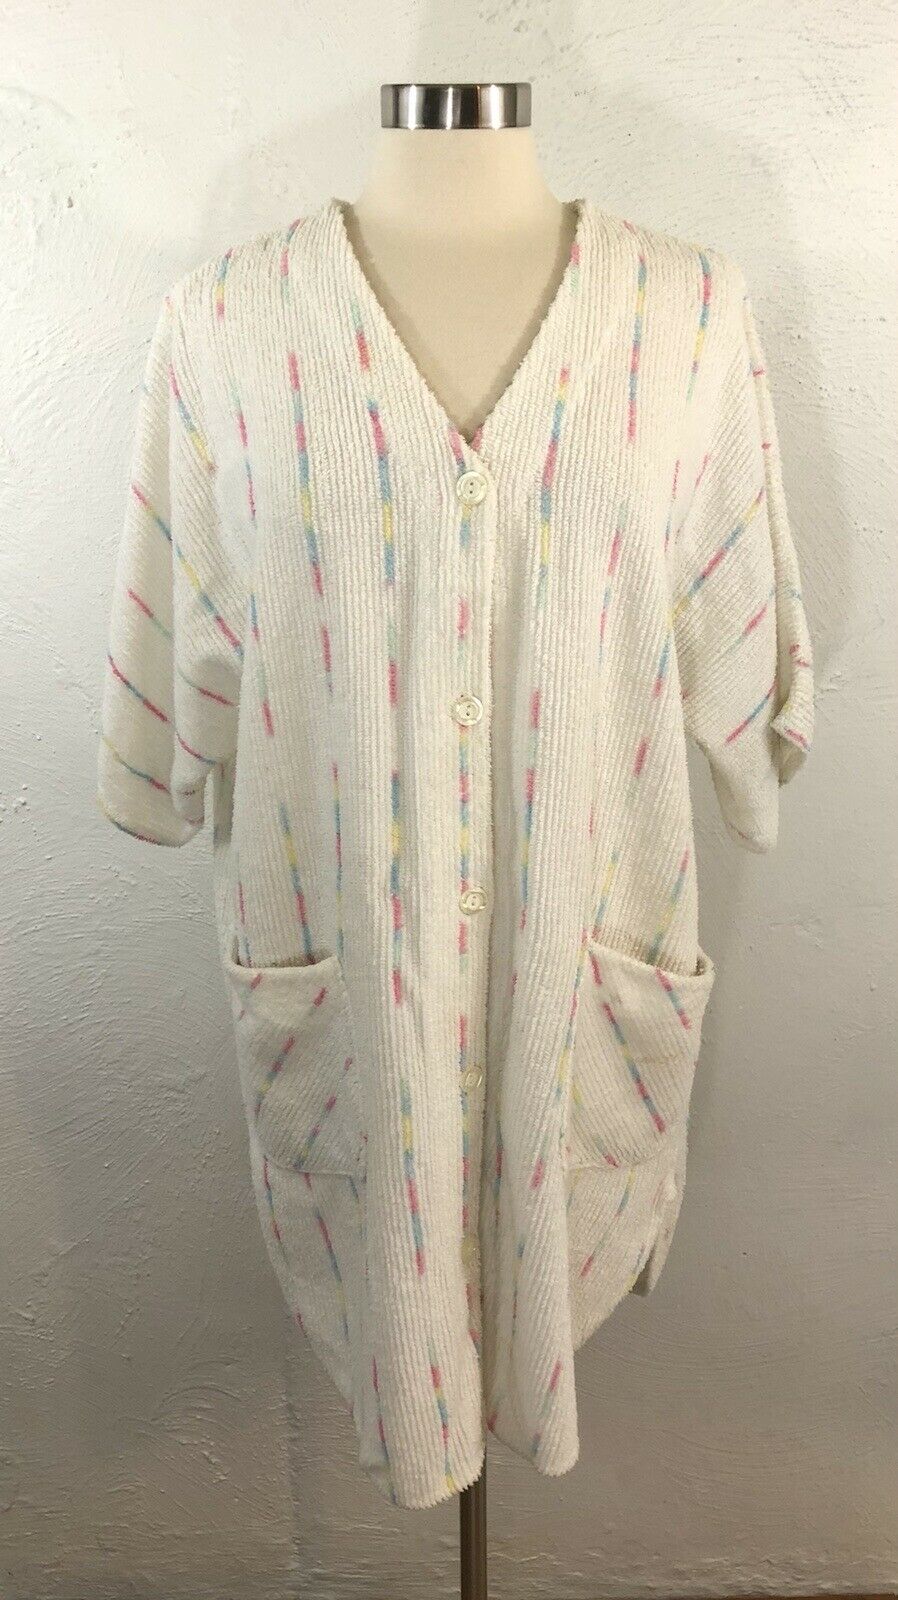 Vintage 80s 90s Terry Cloth Beach Pool Swimsuit Cover Up Button Up Pastels